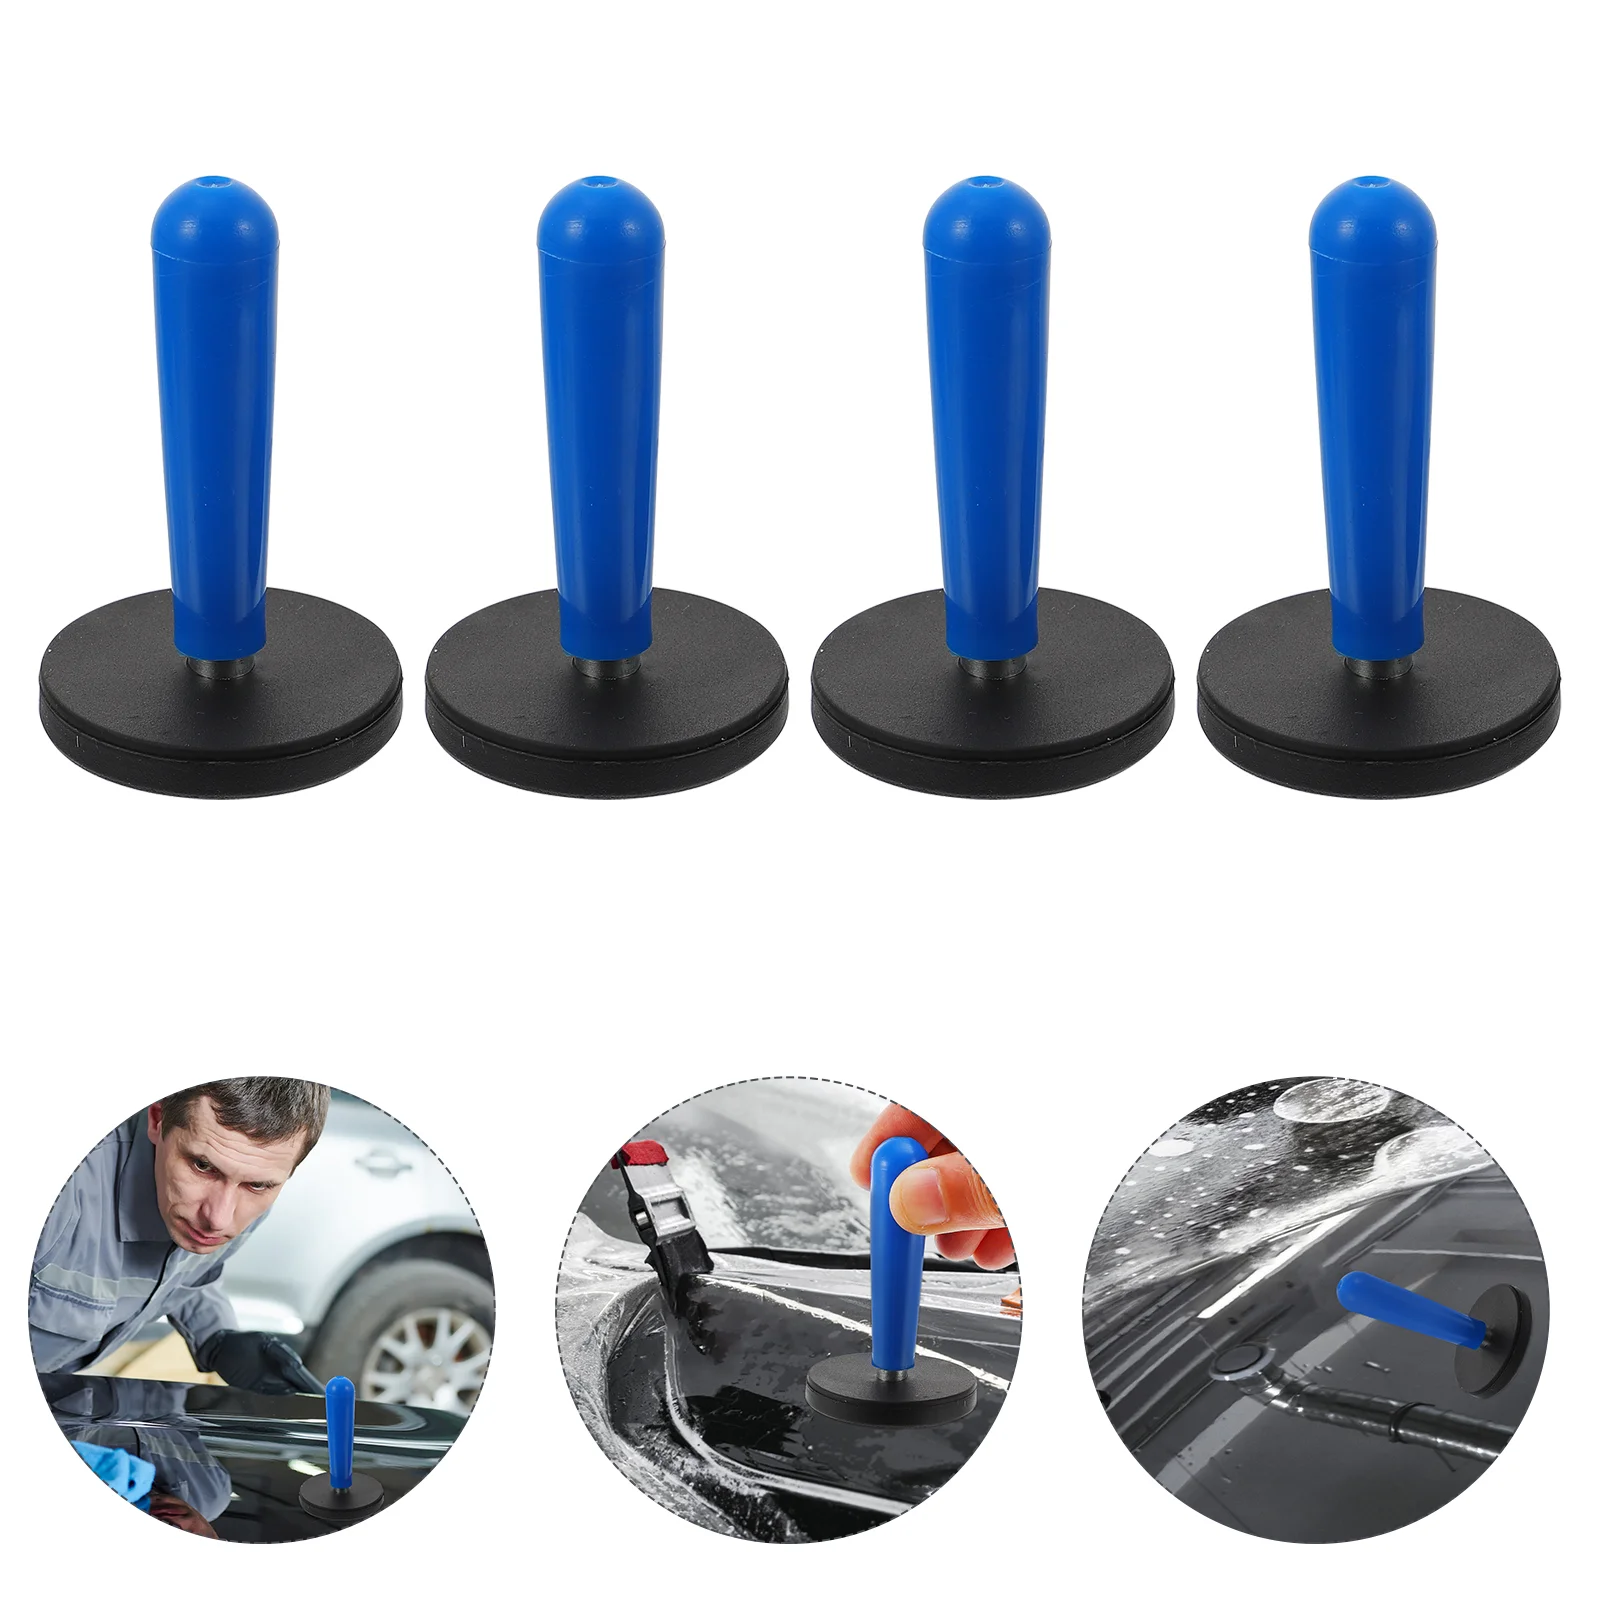 

8 Pcs Magnetic Mount Film Tool Wrap Gripper Vinyl Magnetic Grippers Wrapping Holder NdFeB Car Install